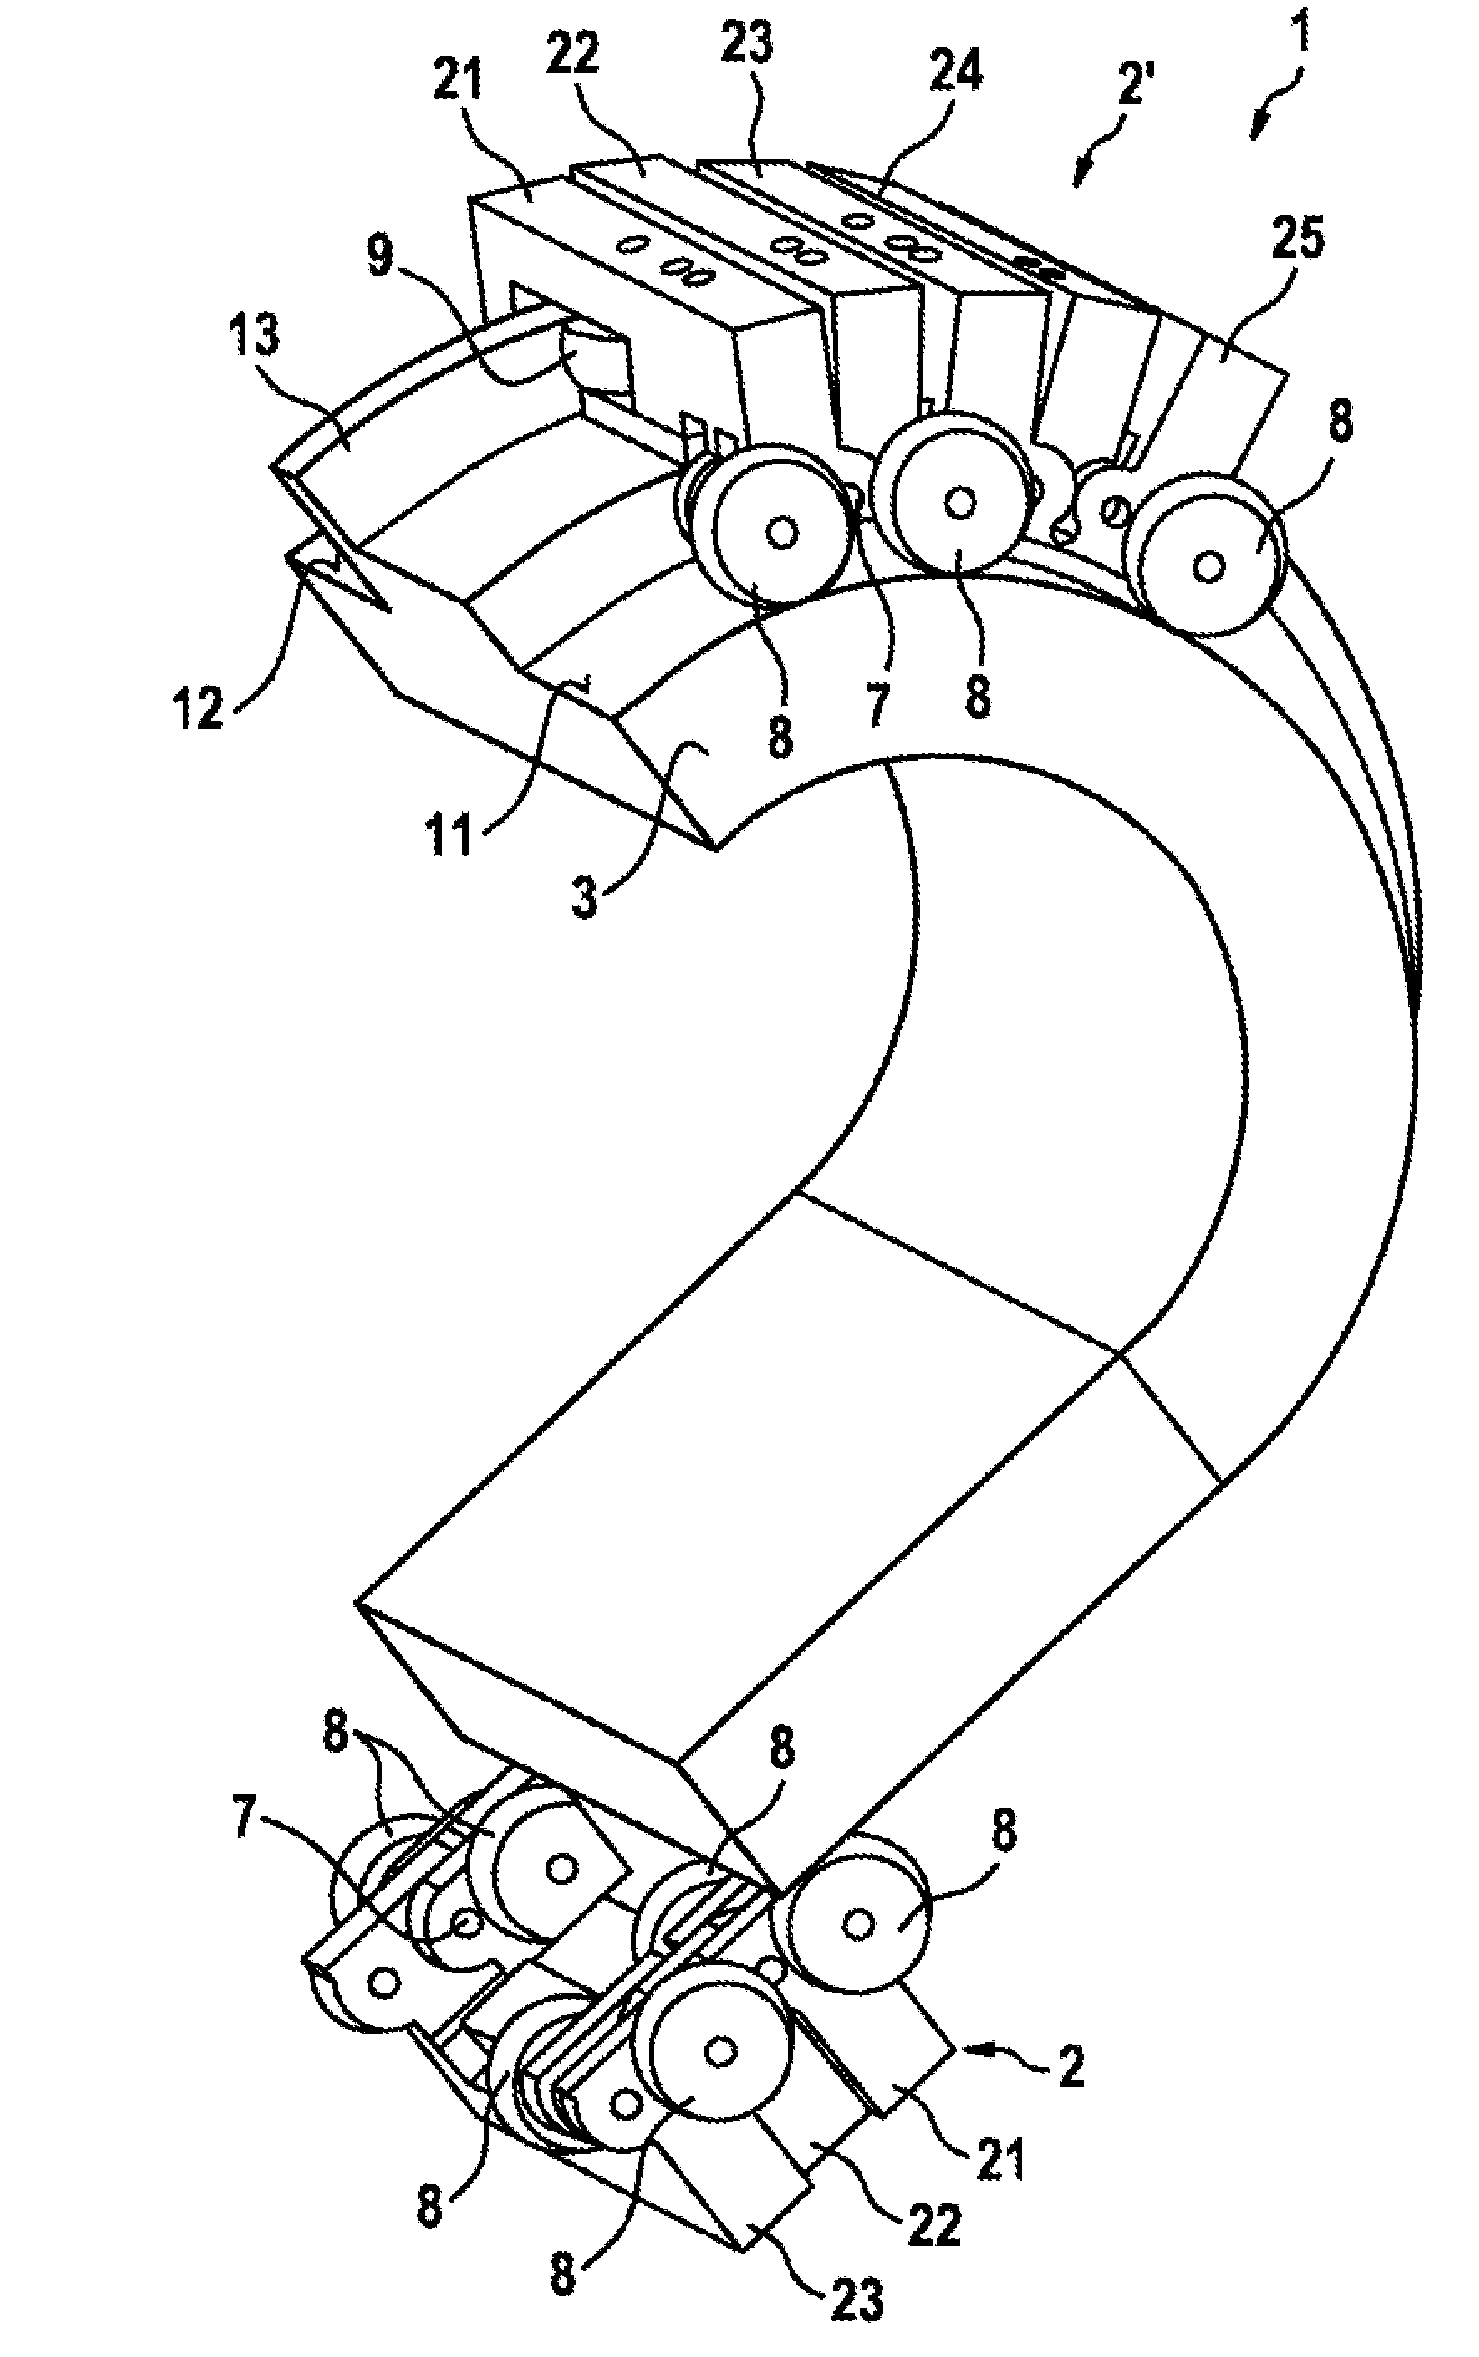 Transporting apparatus with articulated conveying element